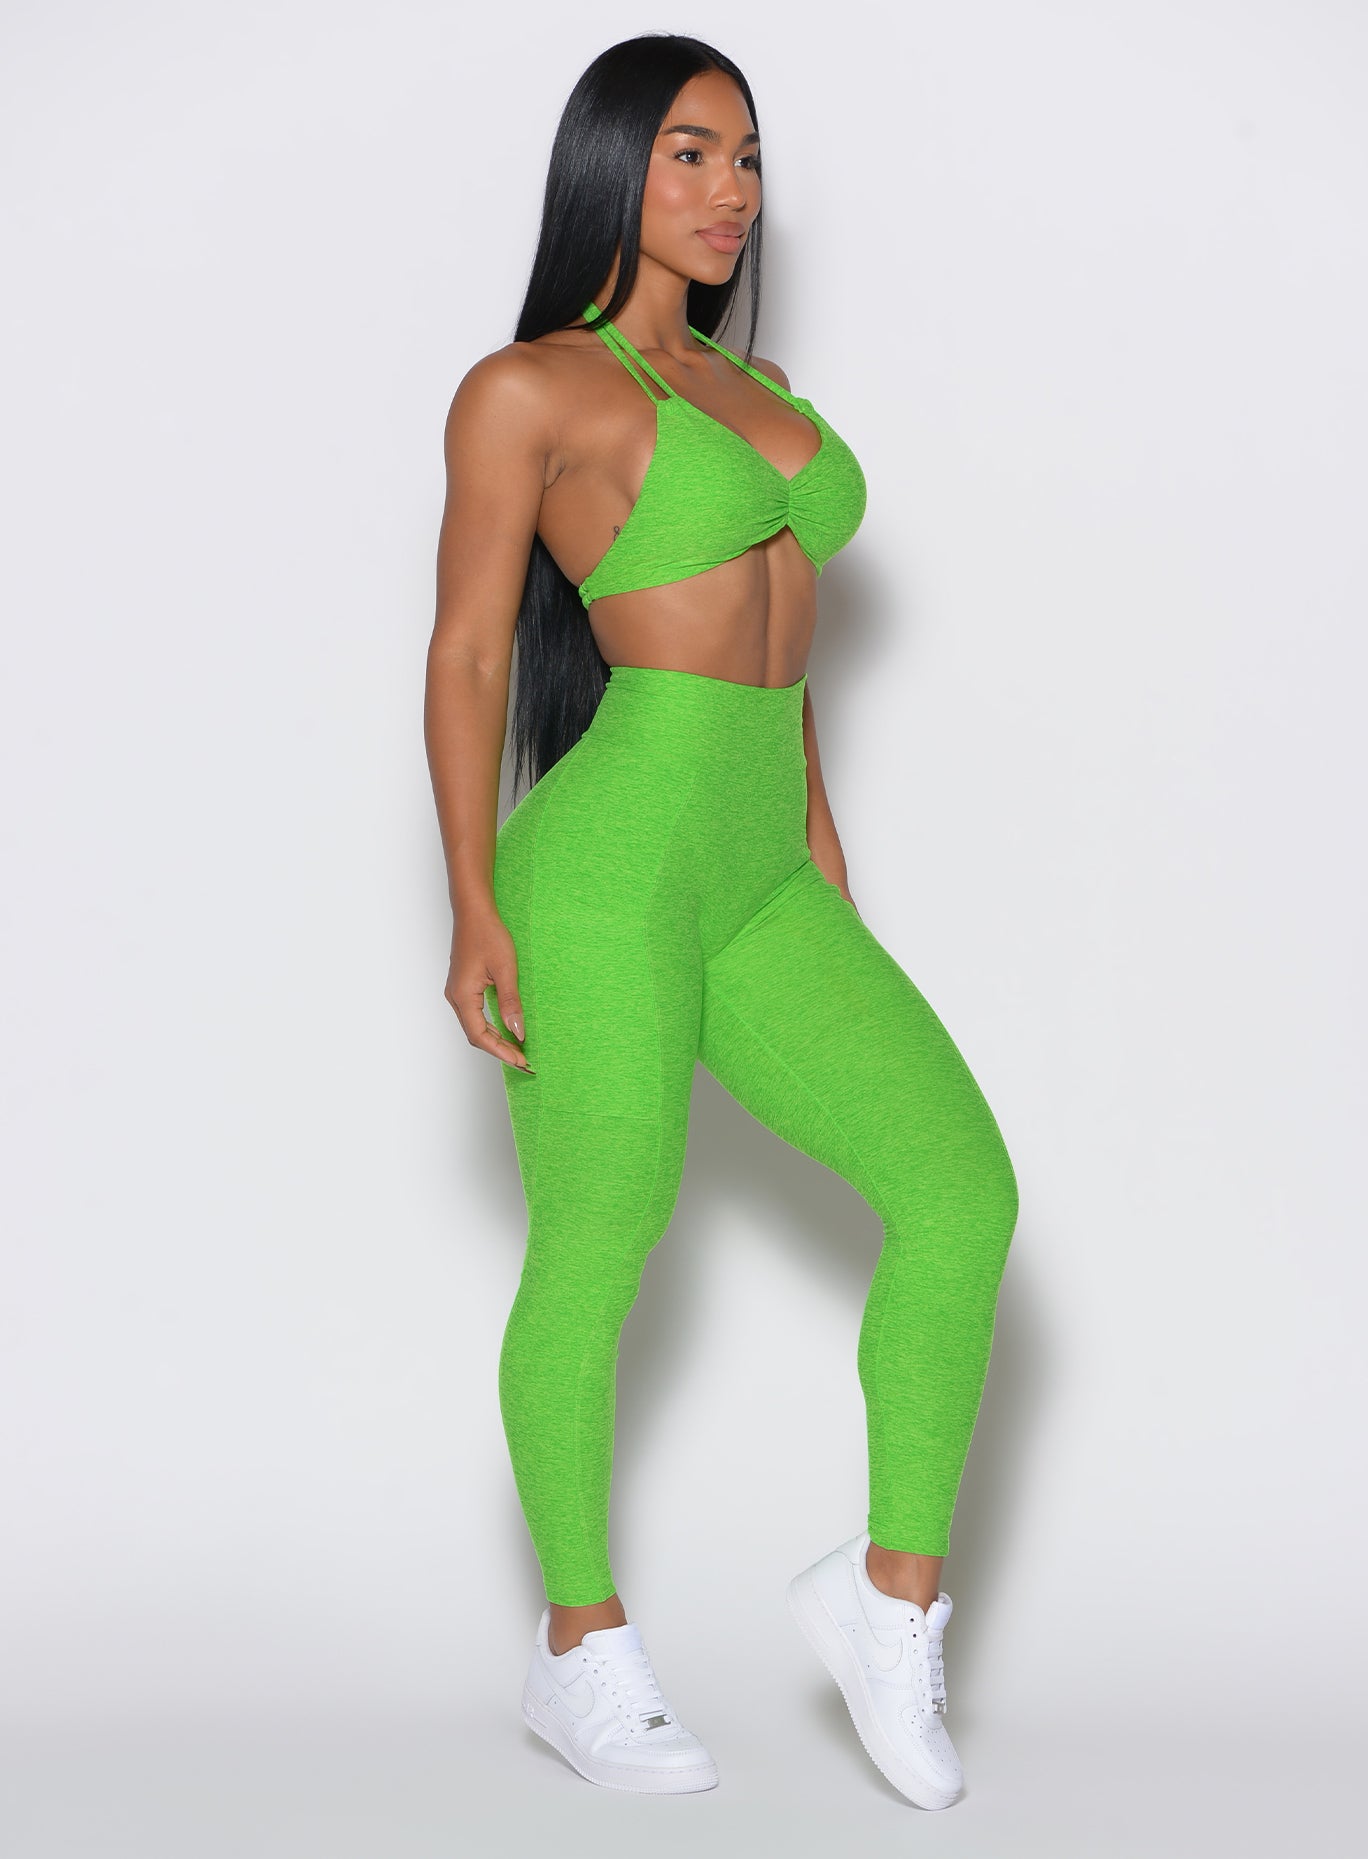 right side profile view of a model wearing our curves leggings in Neon Lime Green color along with the matching sports bra